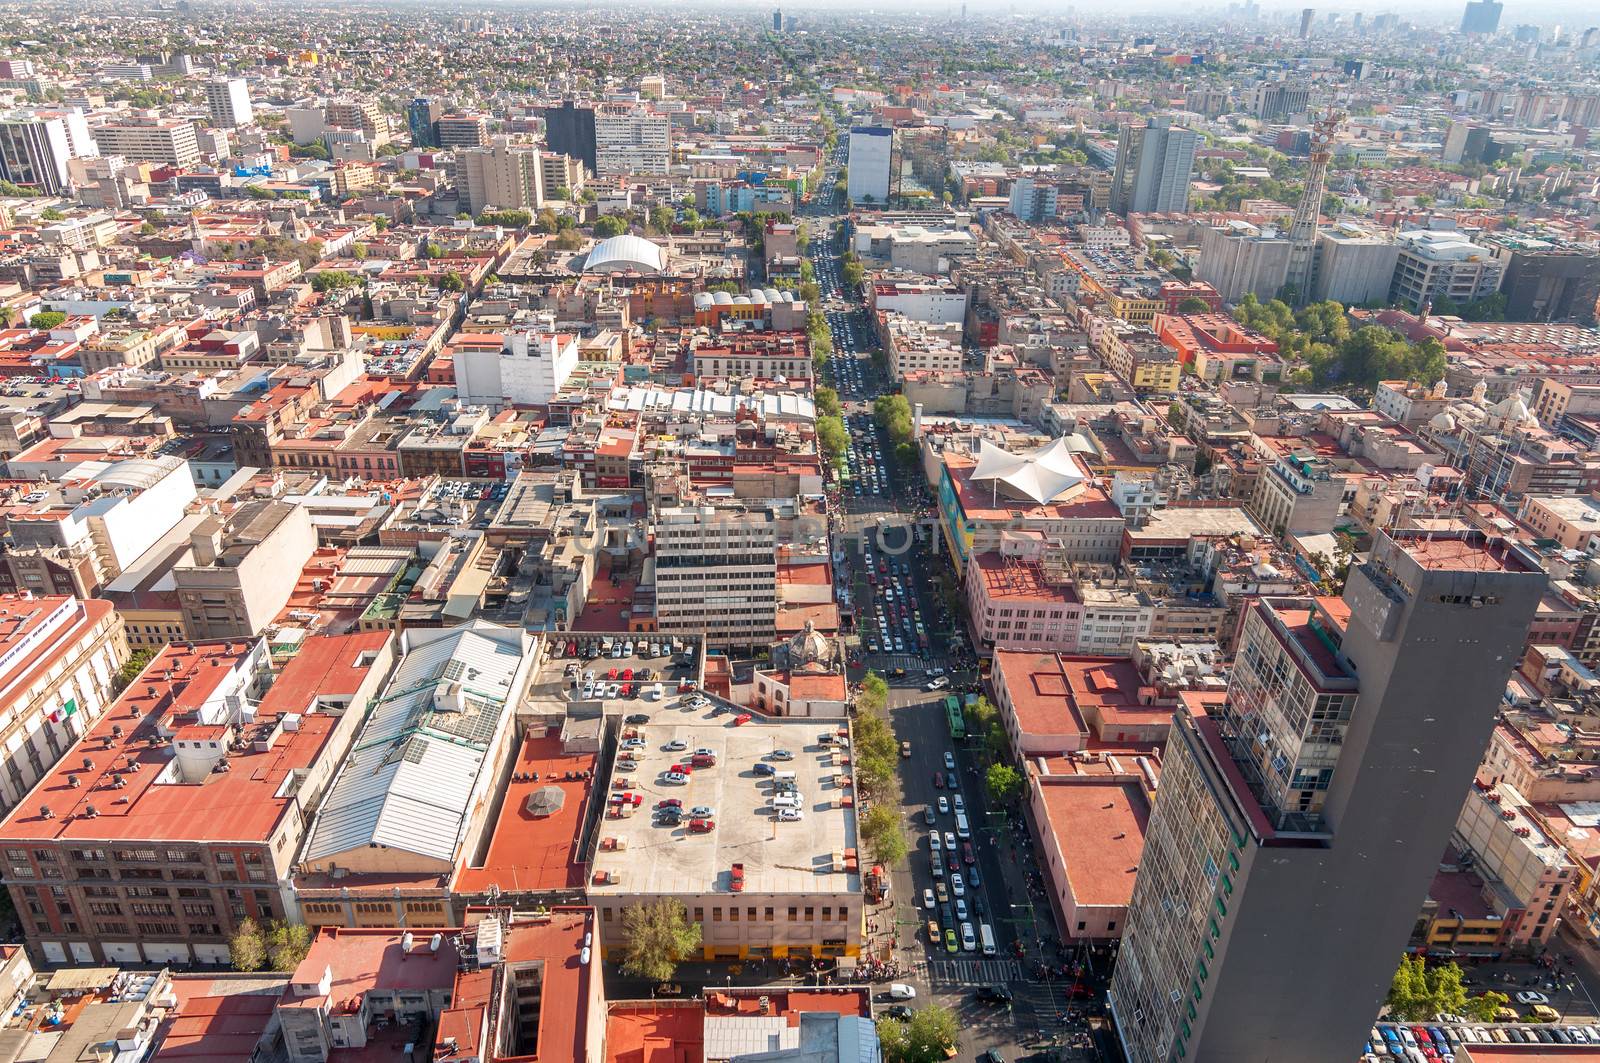 Wide angle view of Mexico City